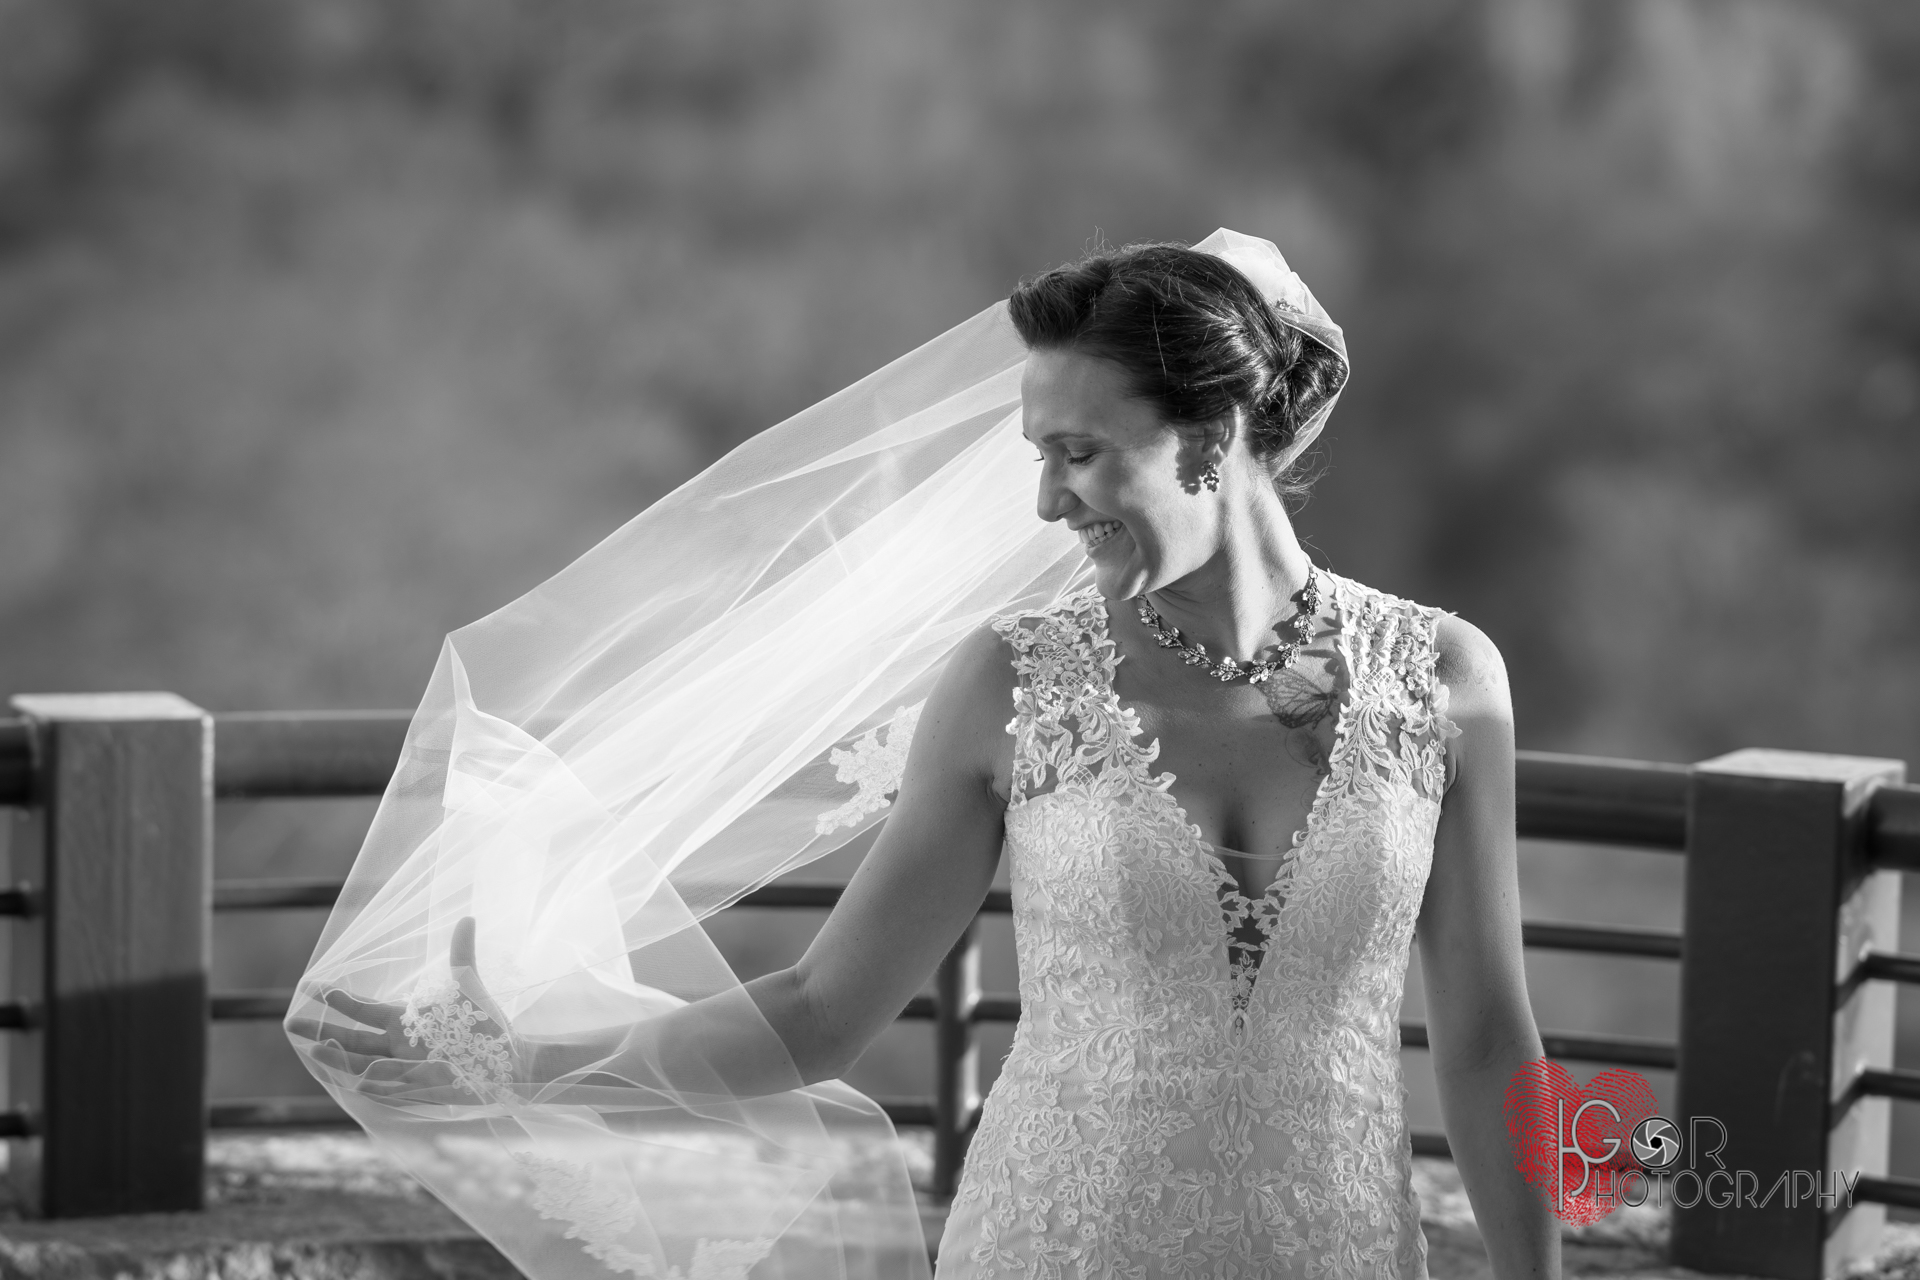 Bridal photography in Plano, Texas